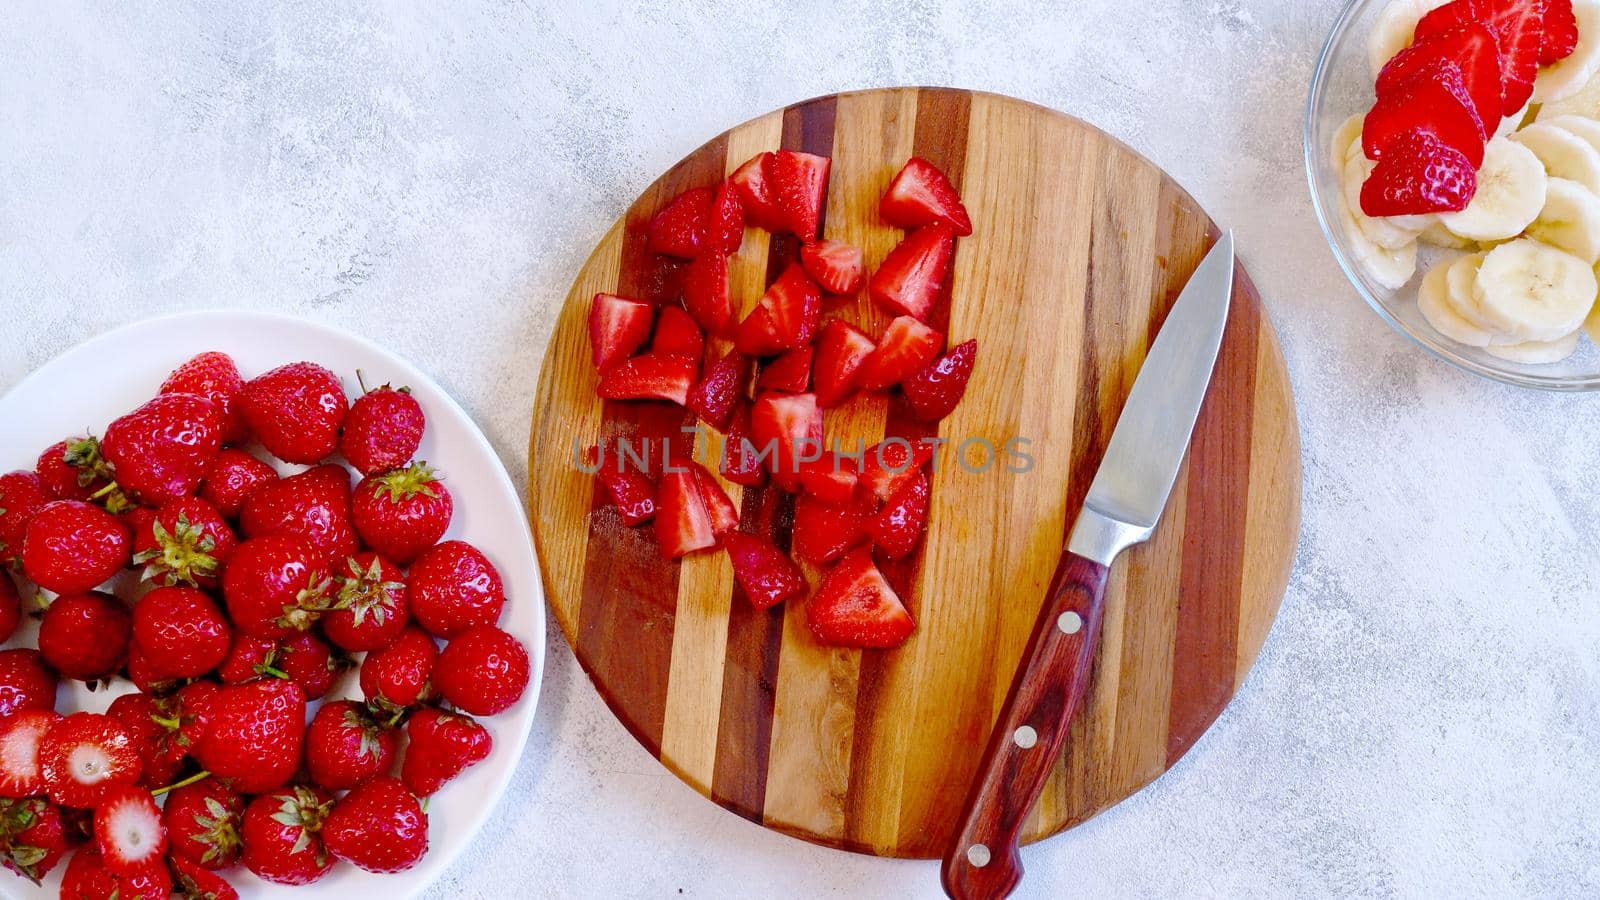 Sliced strawberry on wooden board. Preparing smoothie or milkshake with strawberry and banana. Top view. Flat lay